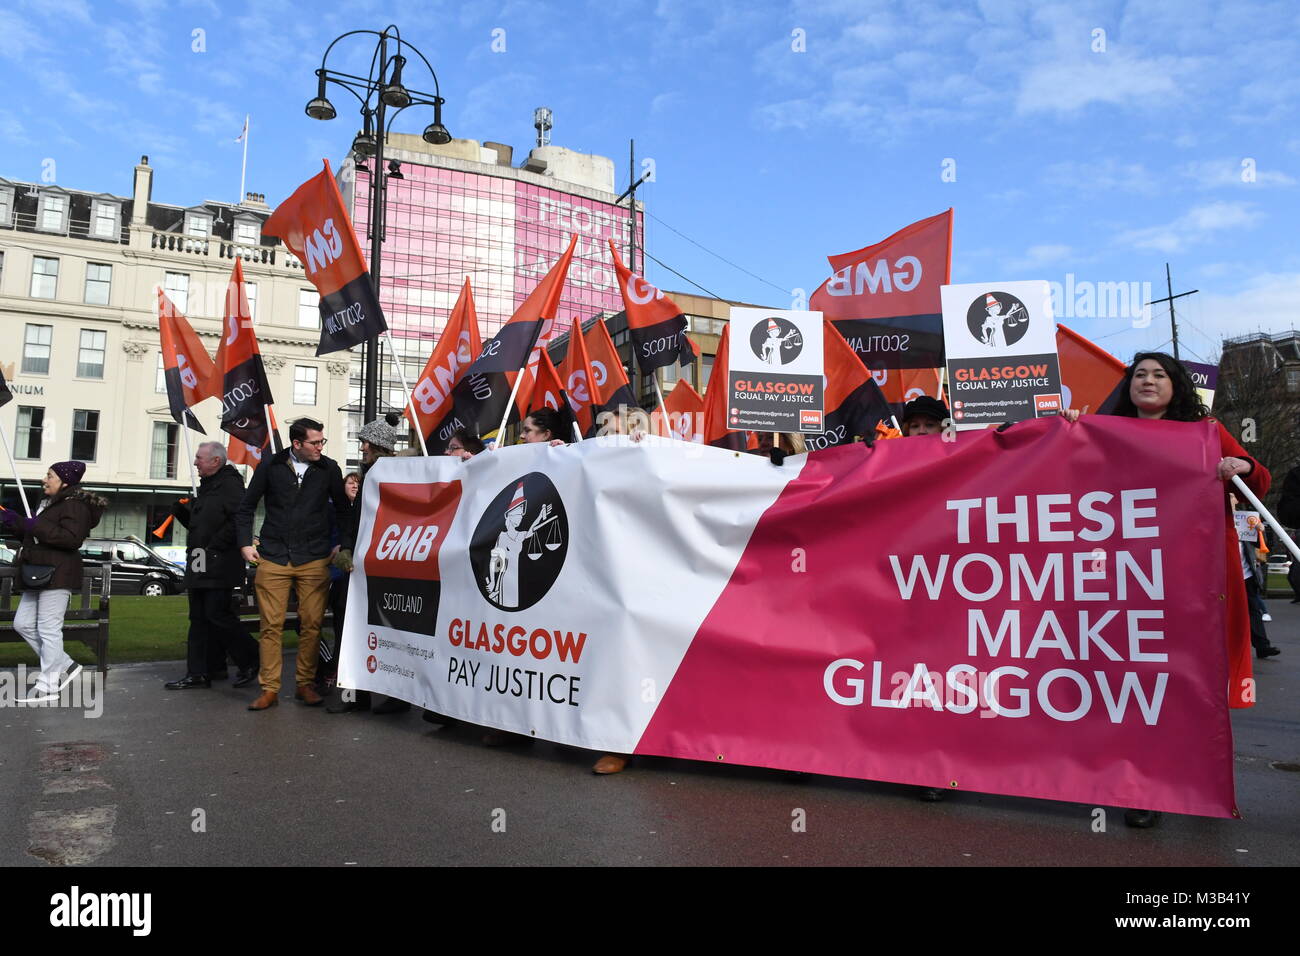 Glasgow, Scotland, UK - 10 February 2018: Women (and men) demonstrating at an equal pay protest in Glasgow, led by women dressed as suffragettes Stock Photo